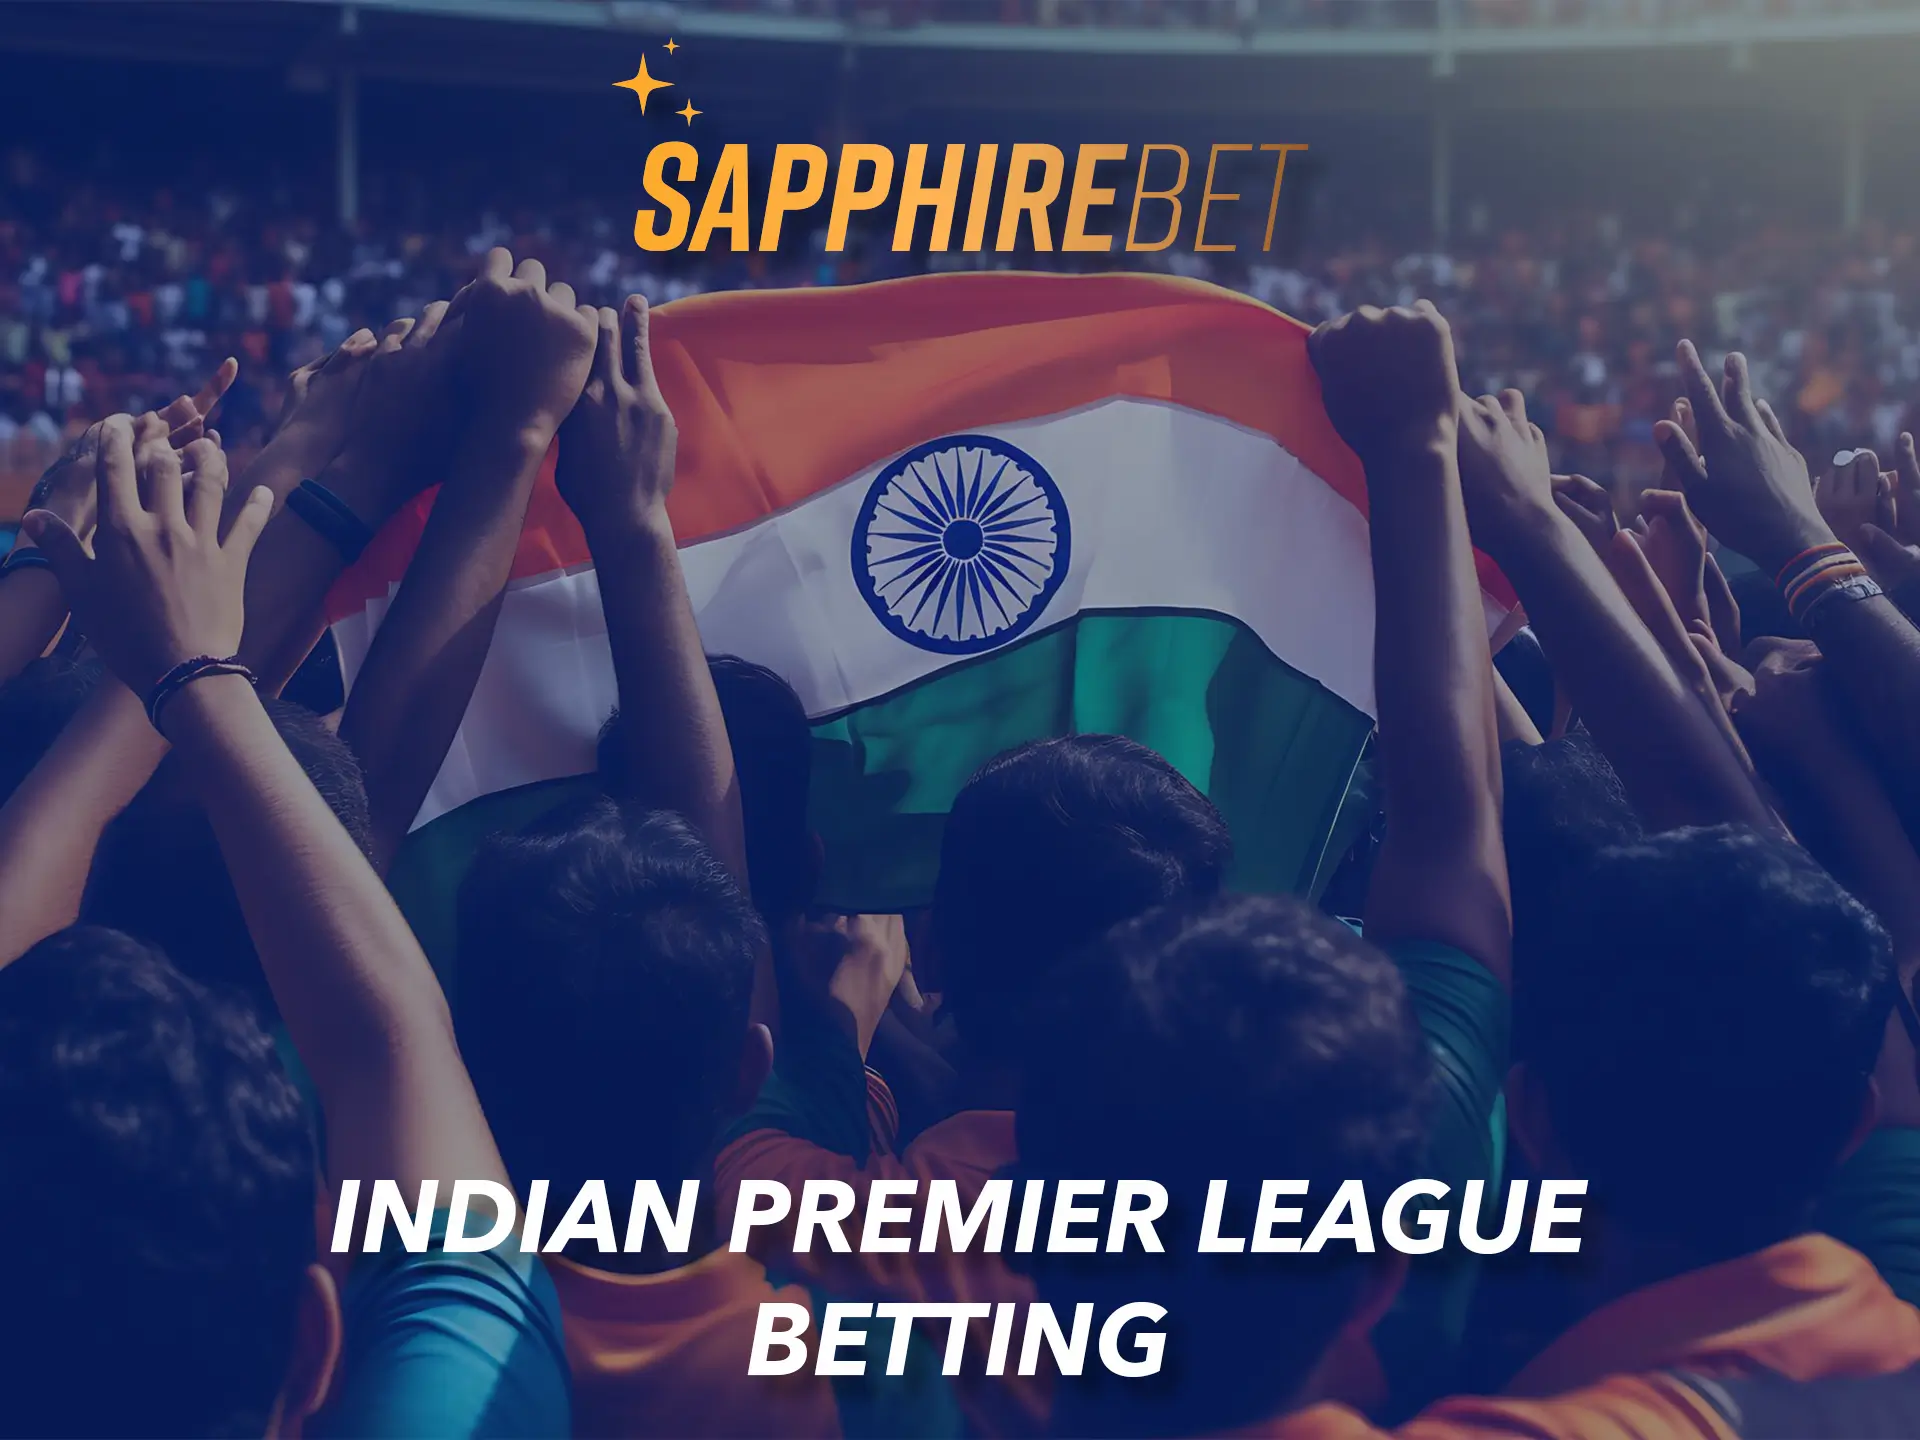 A unique national cricket tournament in India awaits your bets at Sapphirebet bookmaker.